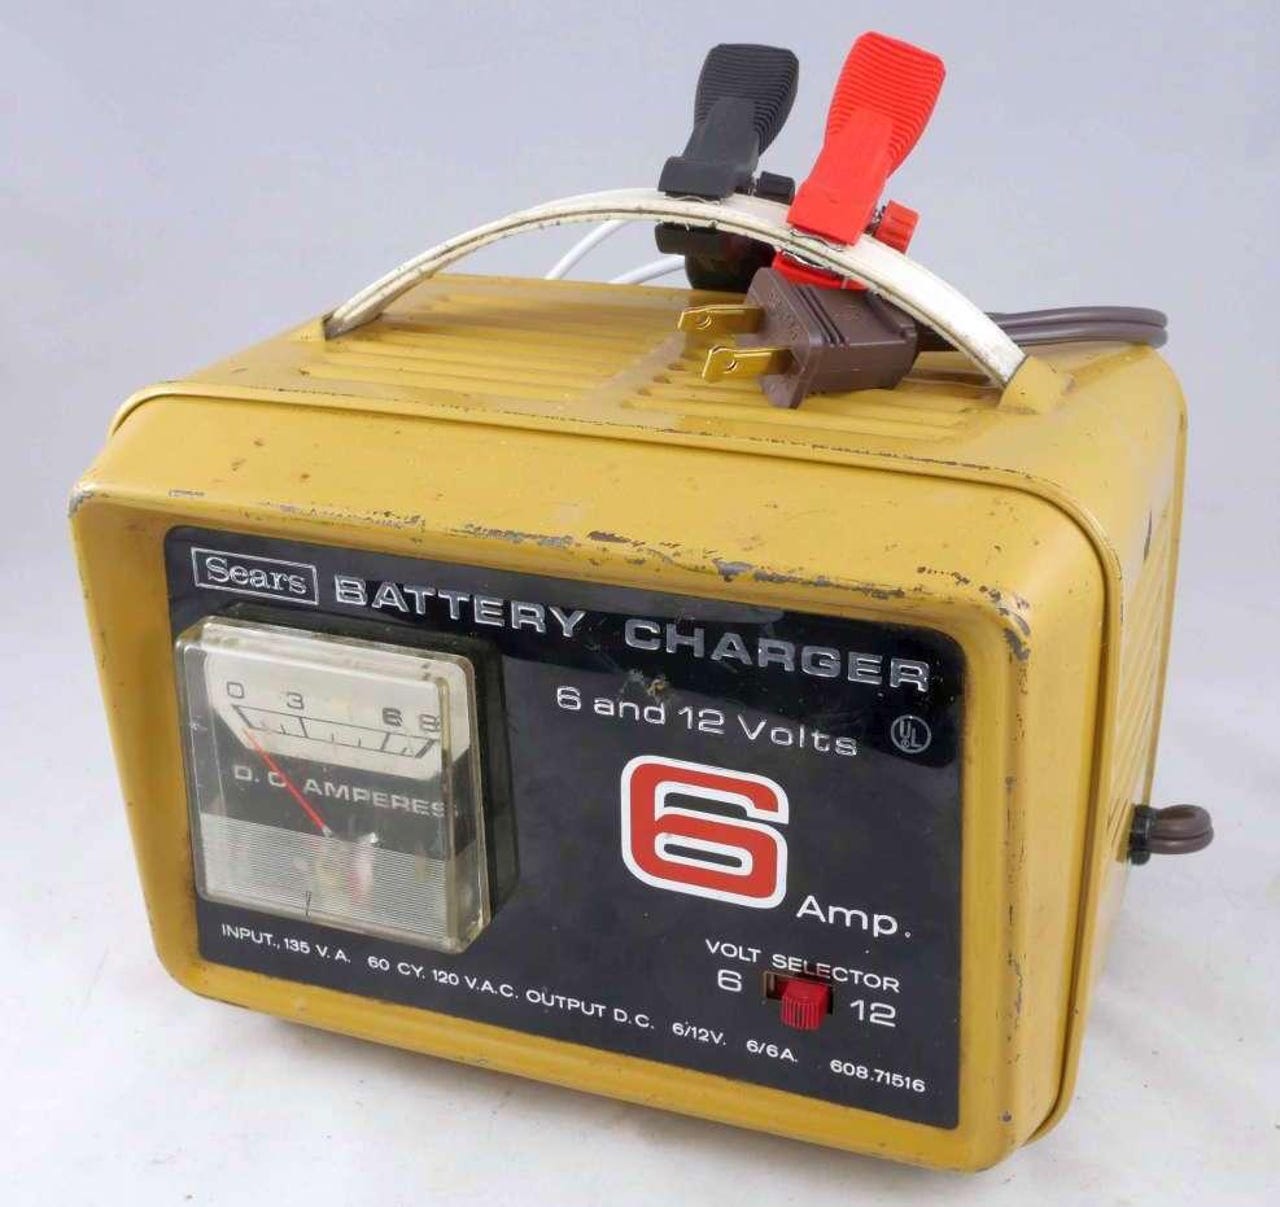 contenteetimes-images-edn-diy-resurrect-battery-charger-sears-6-amp-battery-charger.jpg